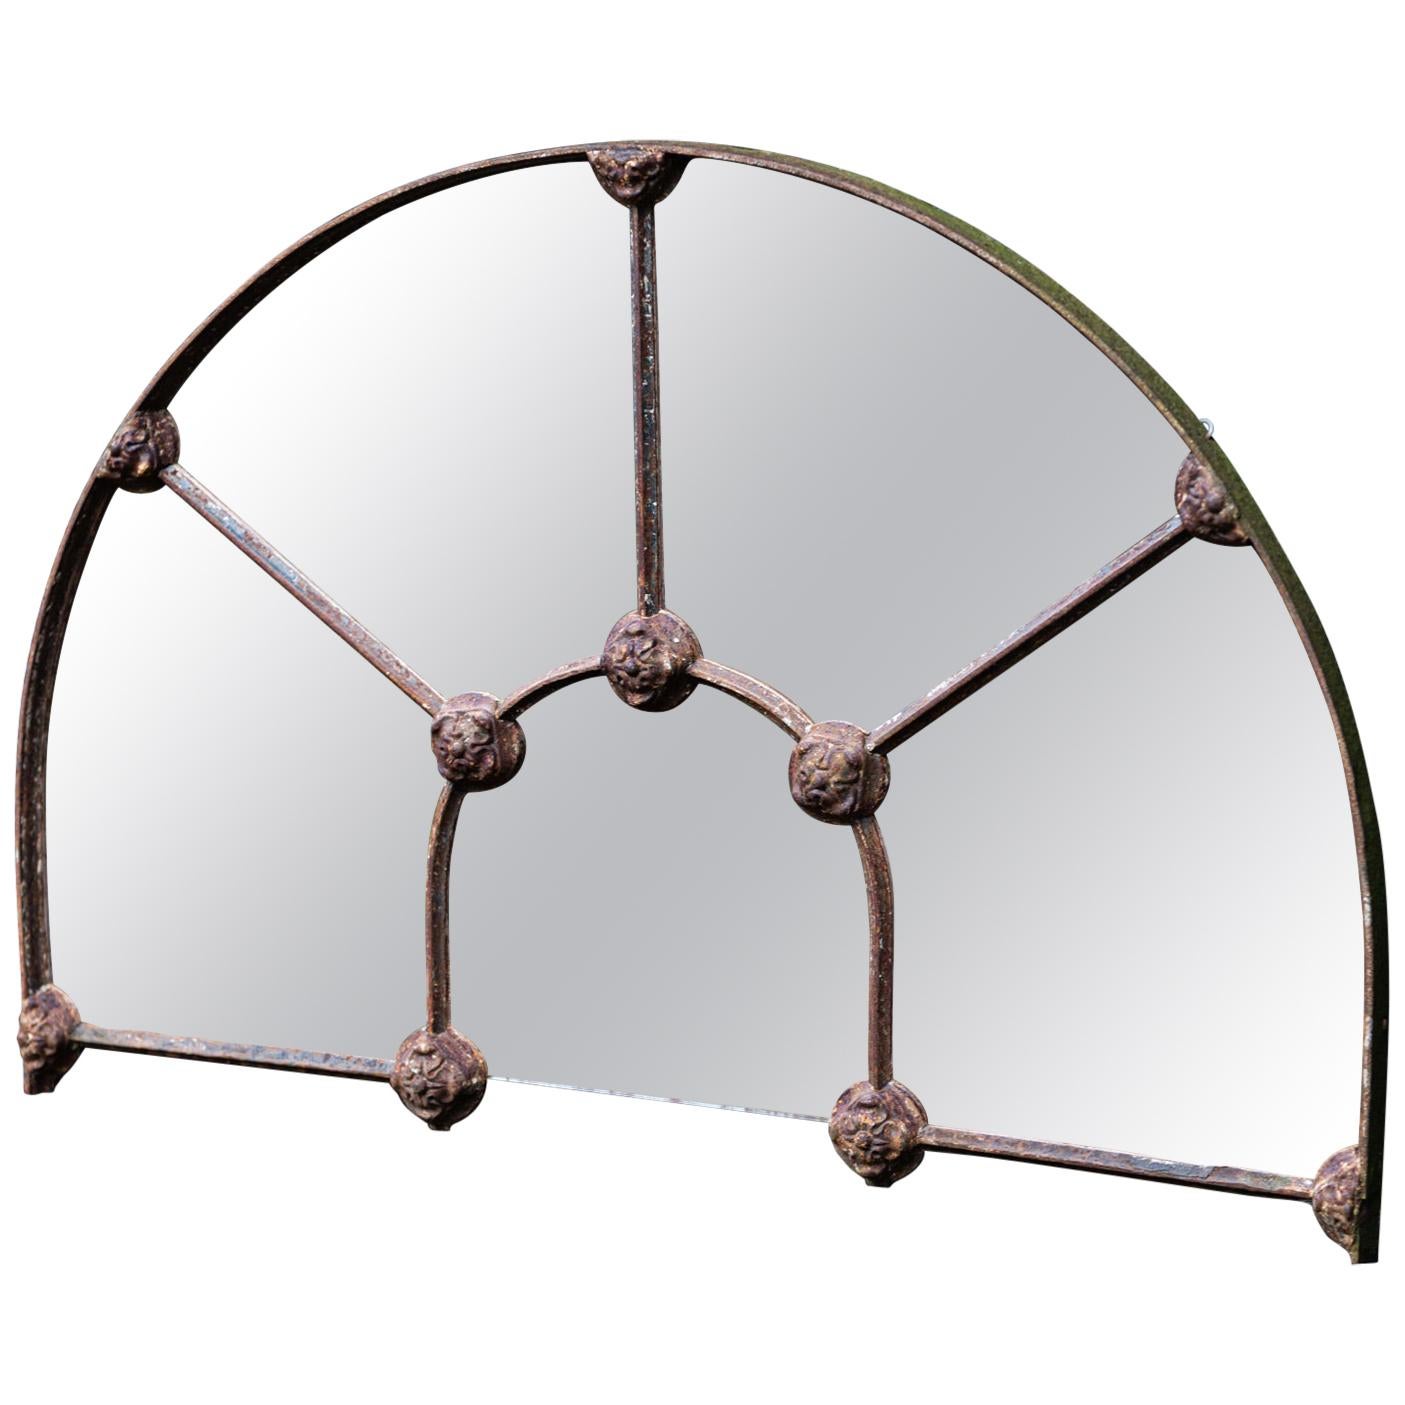 Arched Cast Iron Reclaimed Window Mirror, Mid-19th Century